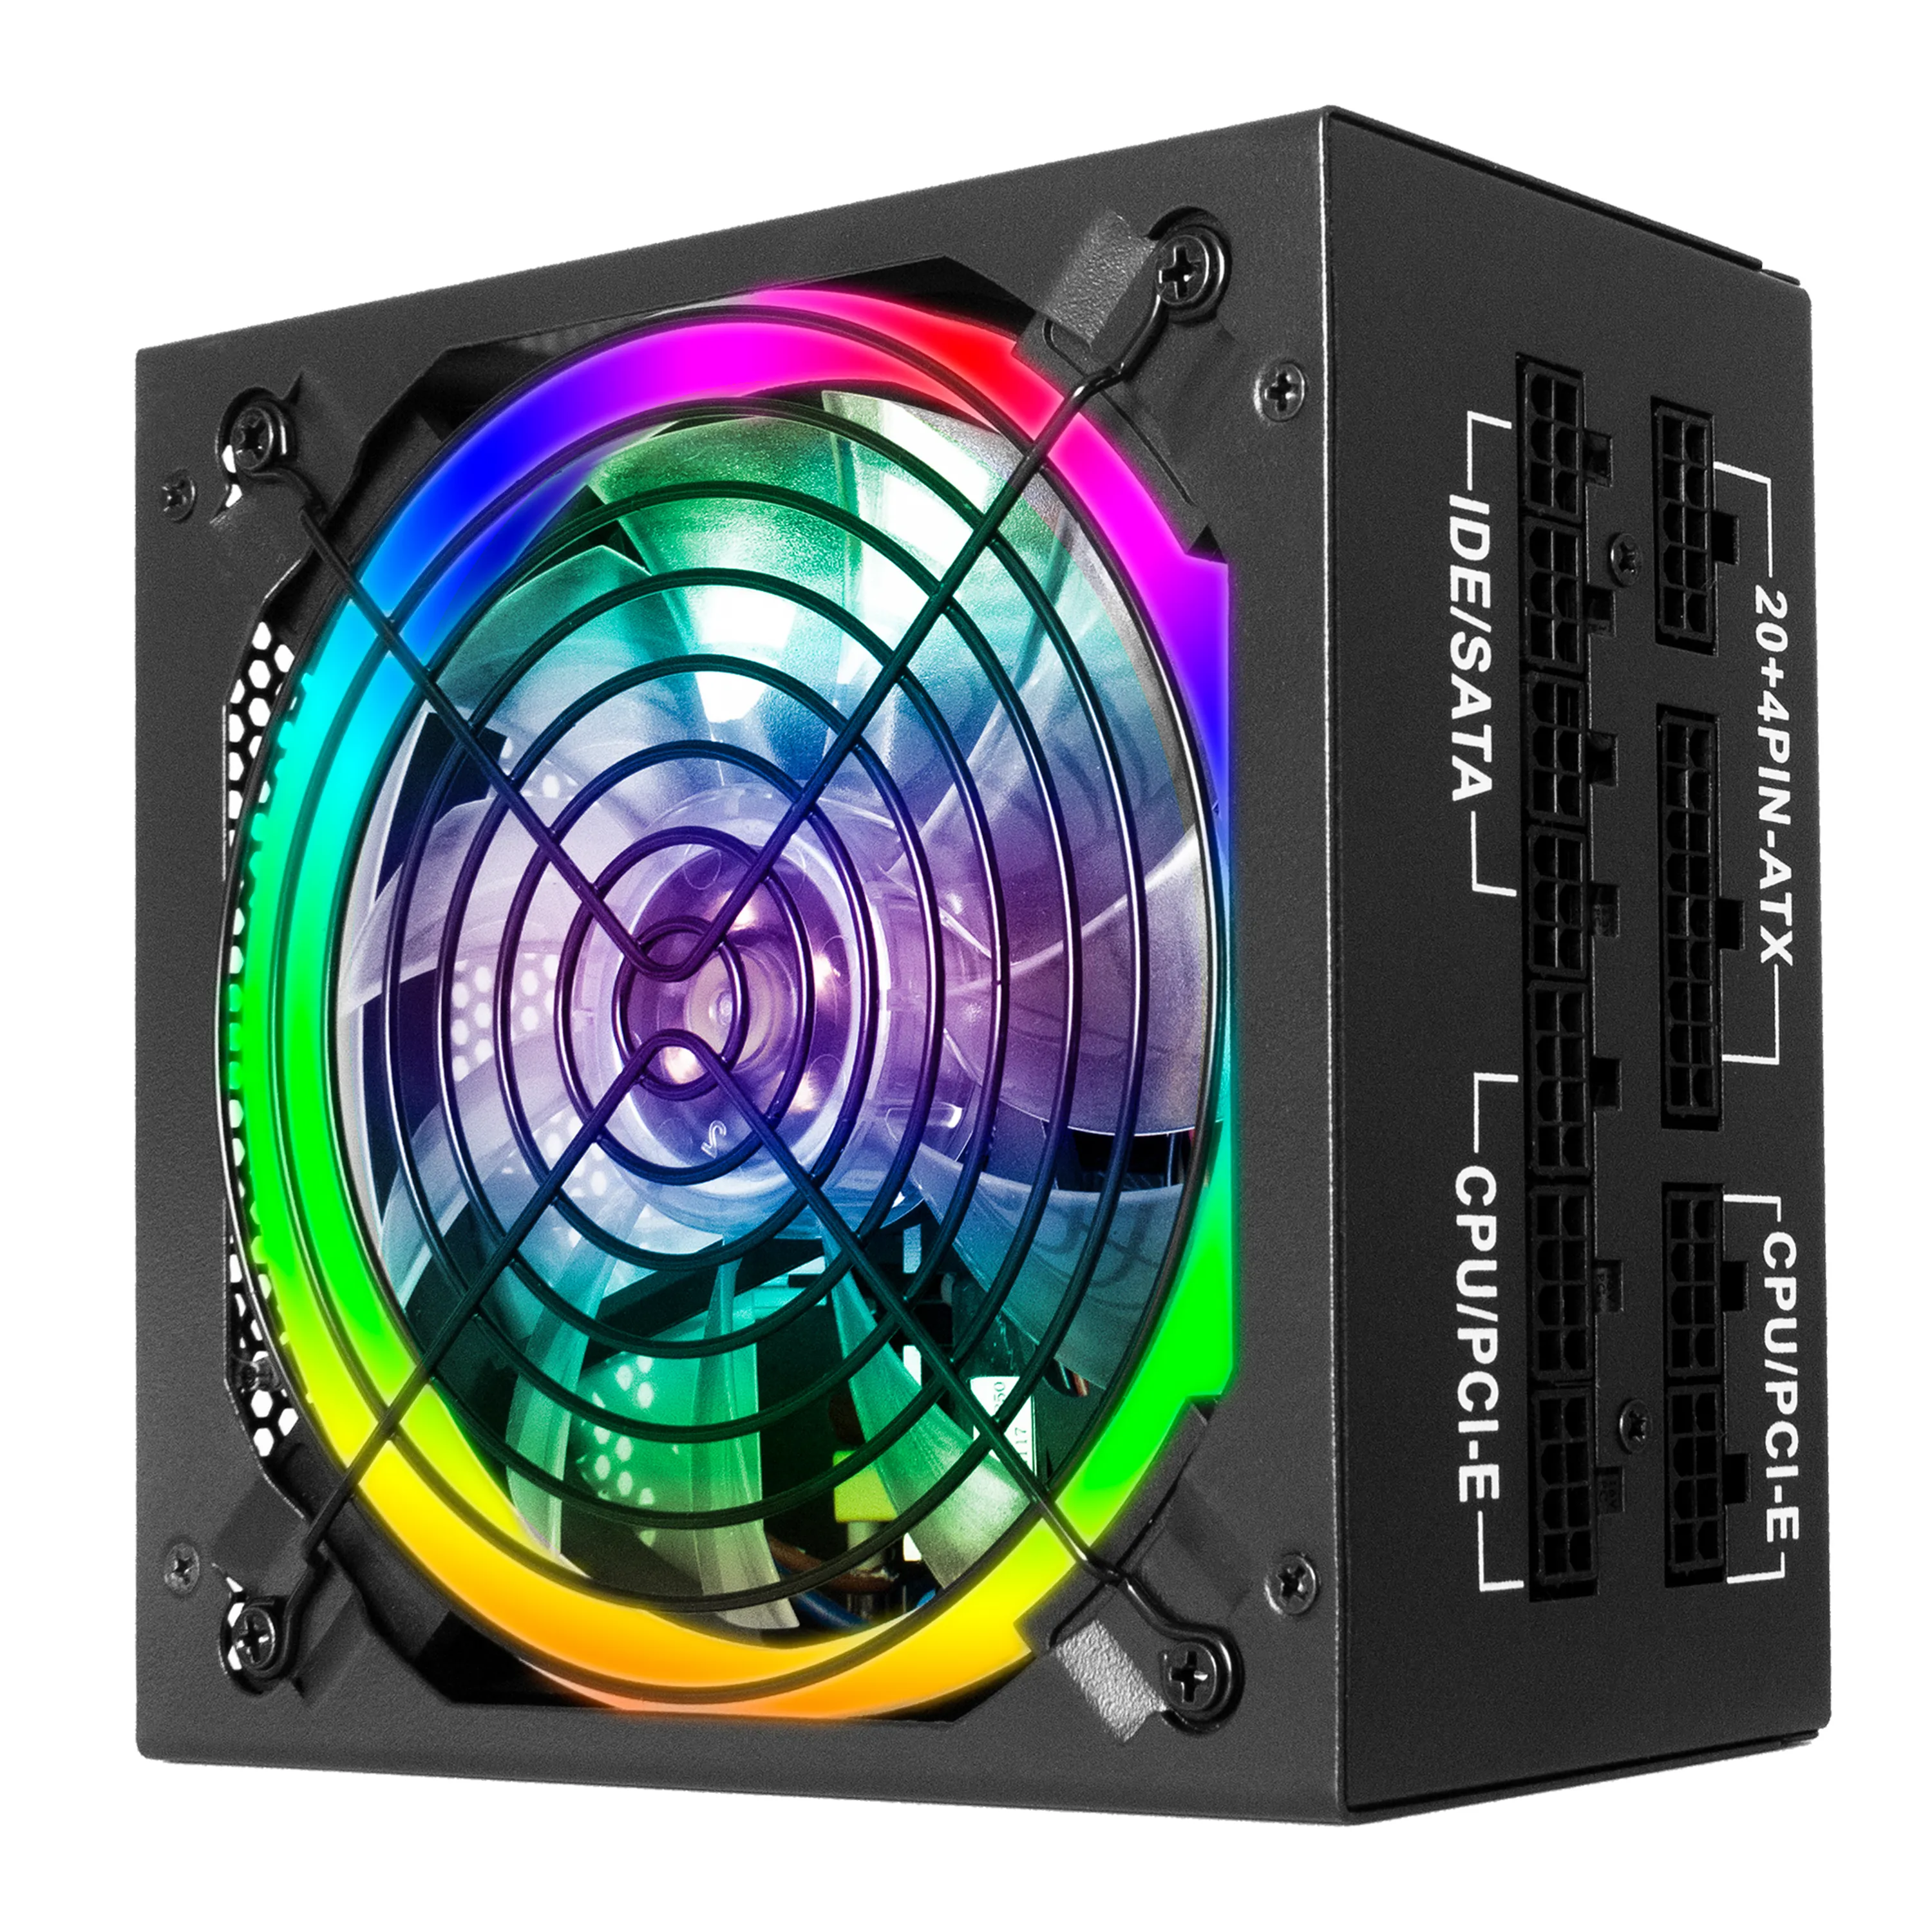 Fan Durable AC Power Computer Power Supply Gold with RGB Desktop Computer Removable ATX 750W 80 Plus Fan Full Modular 20 + 4pin